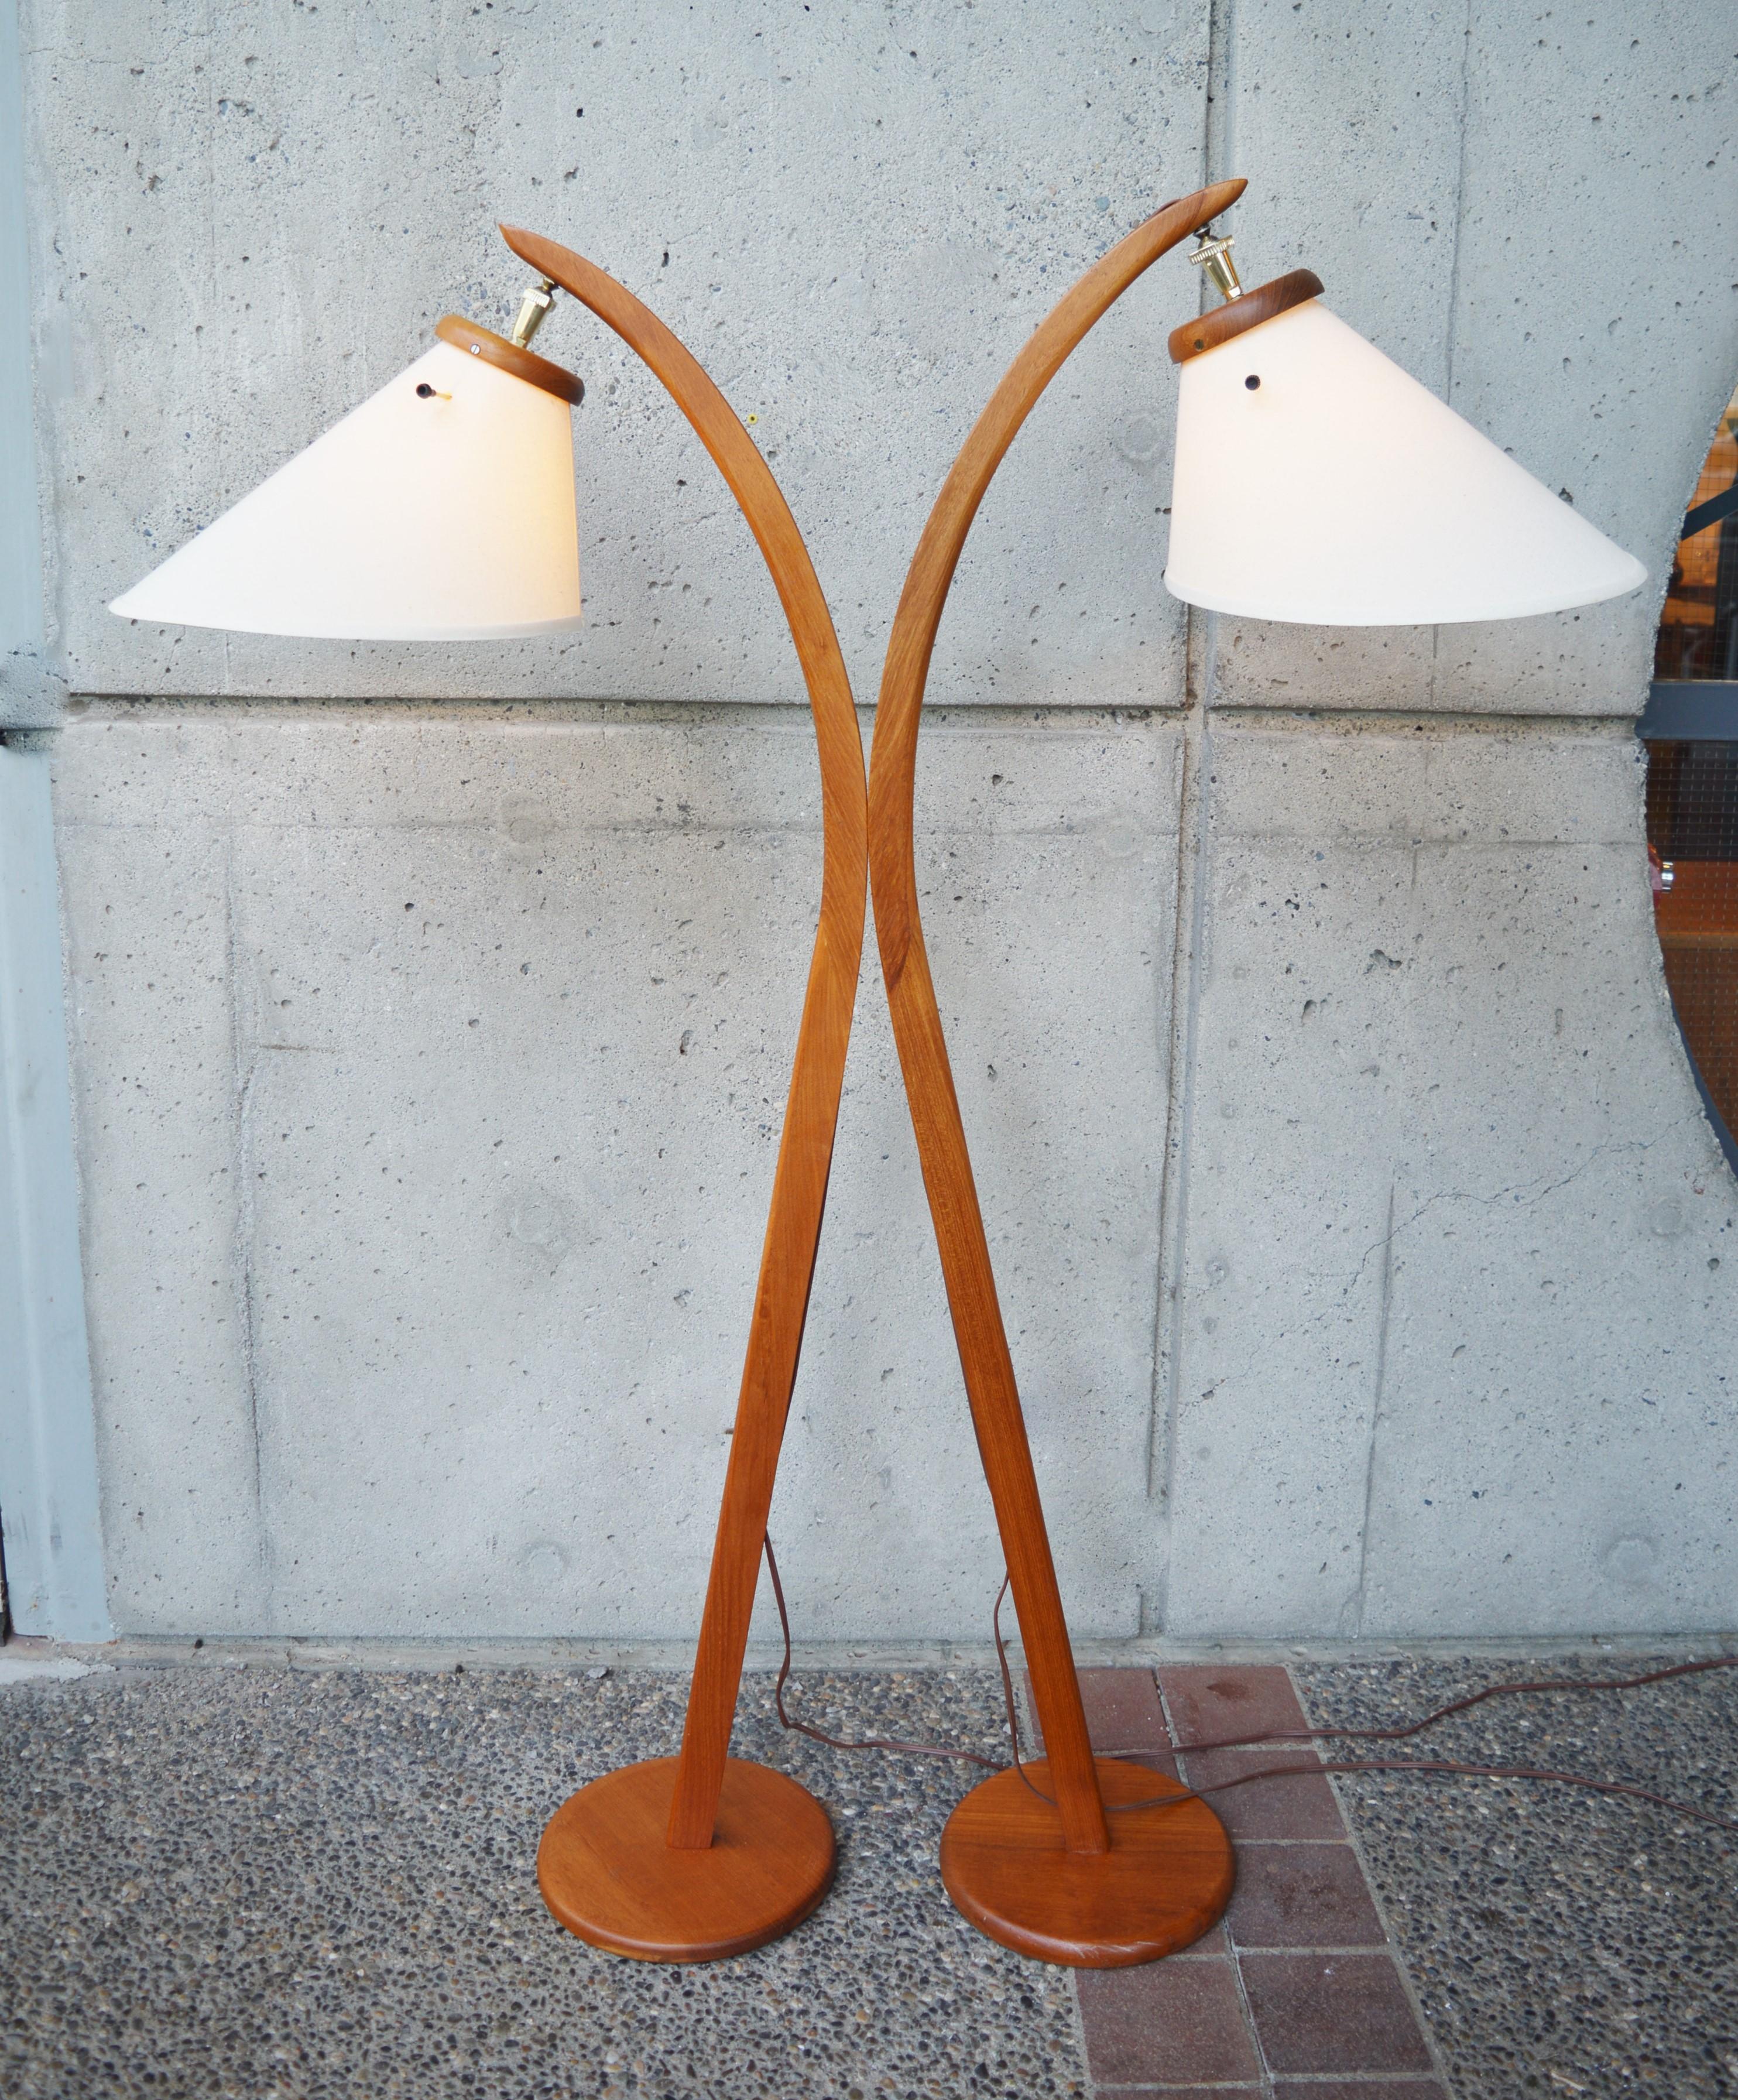 This iconic pair of Danish modern teak arc lamps are perfect as their small footprint allows them to fit in any room. The gentle arc and Classic bonnet shades complete the look. The brass neck hardware is strong and holds up the lampshades as